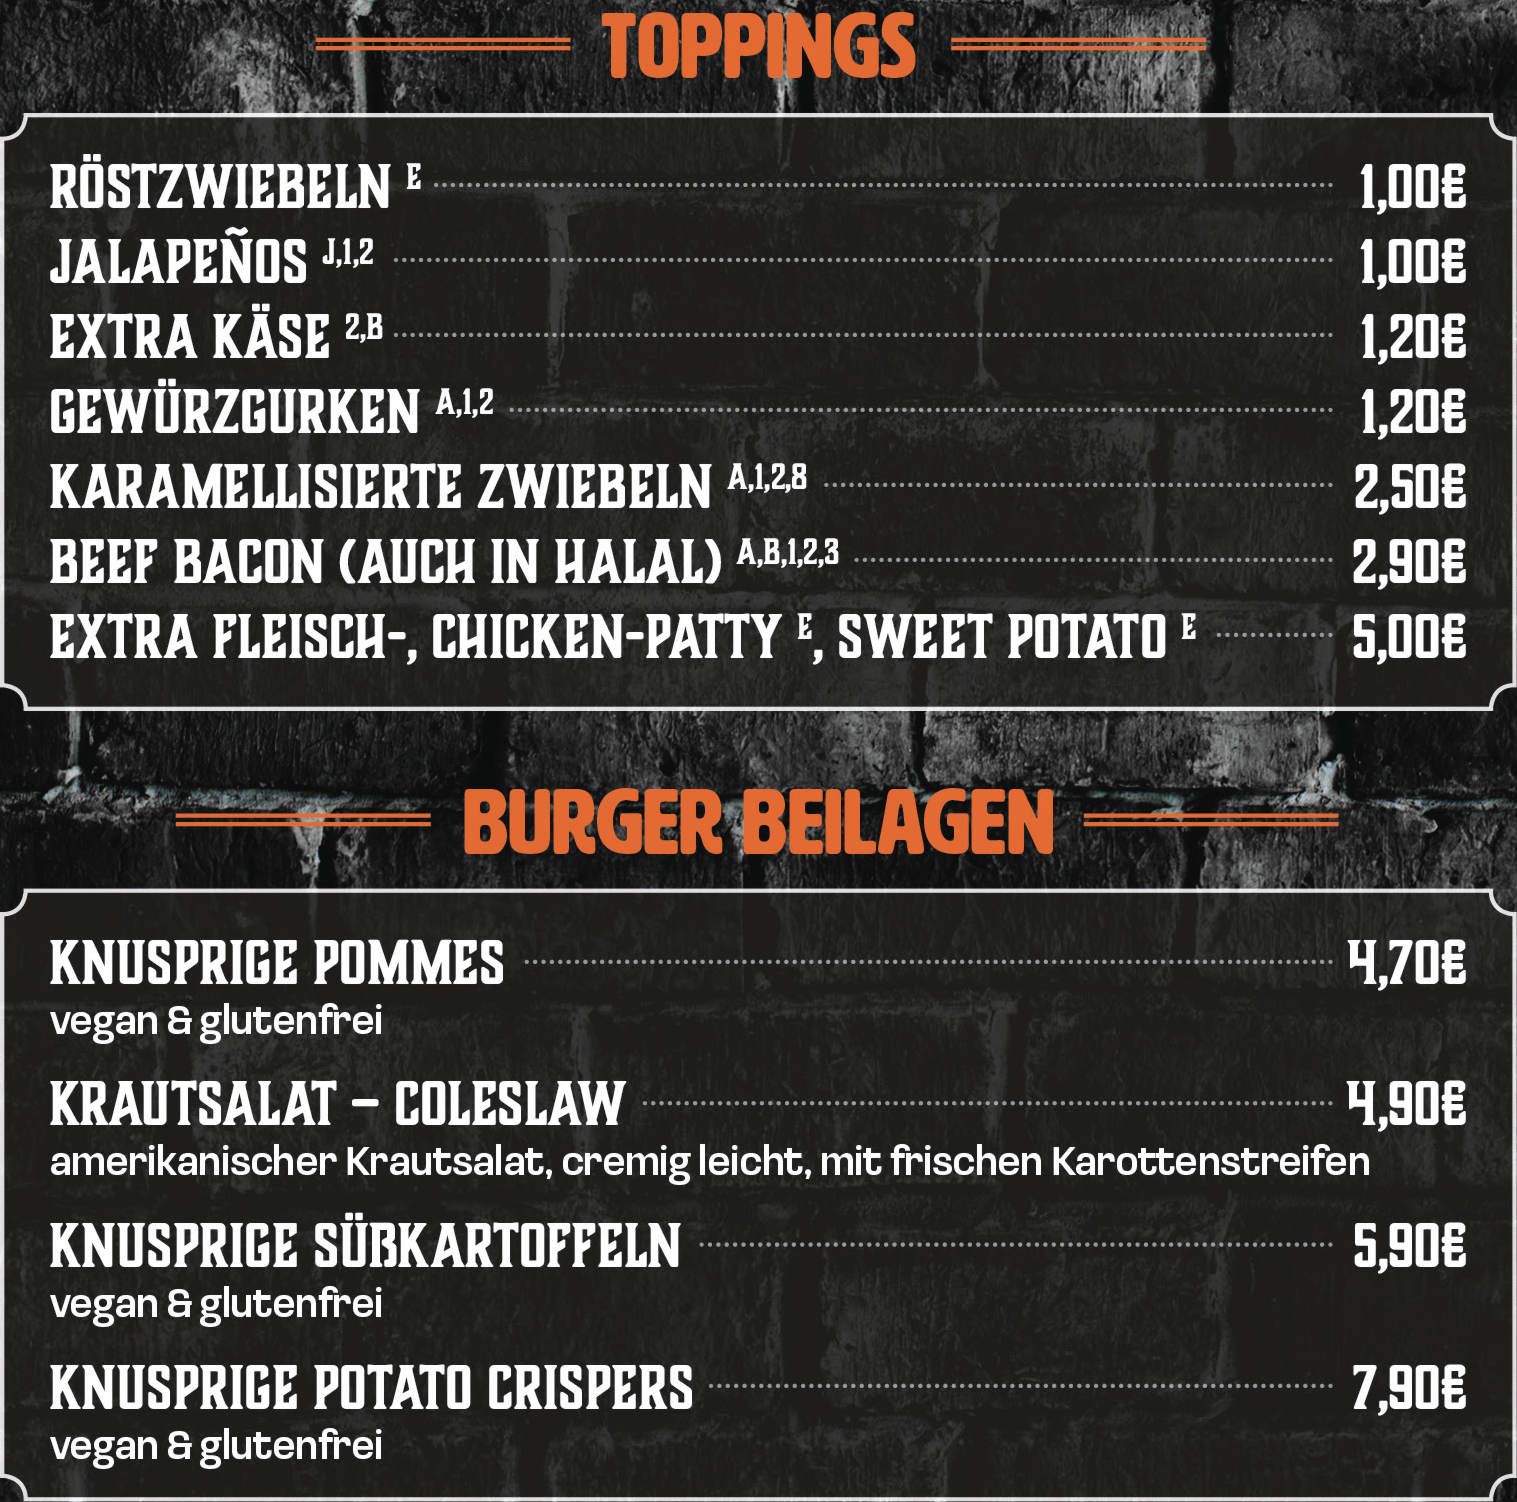 Toppings & Beilagen